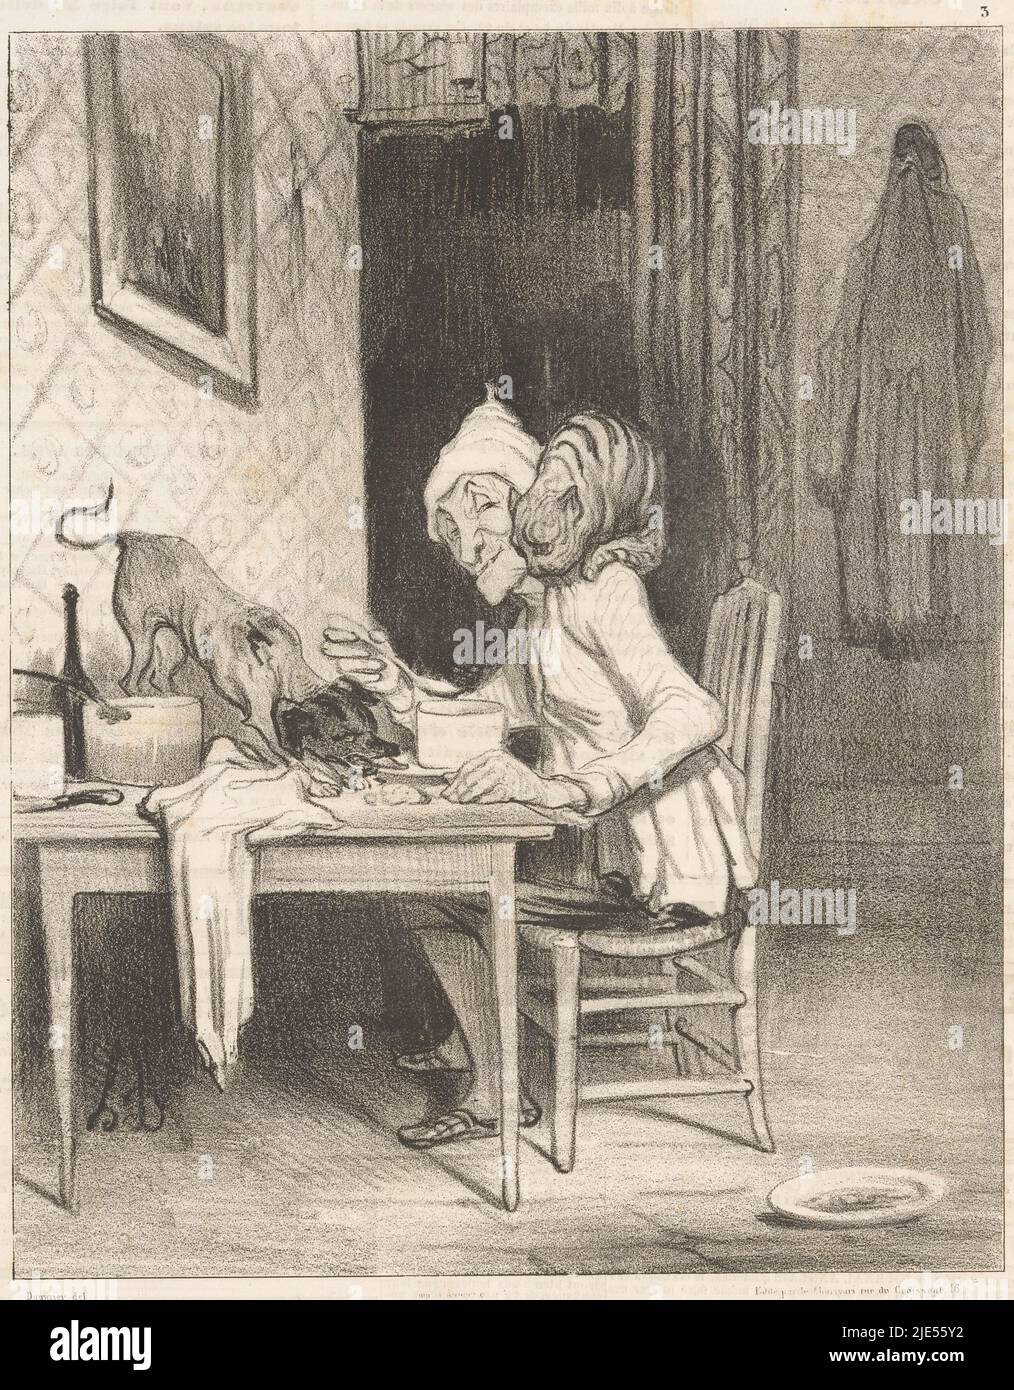 Bachelor breakfast with his cat and dog Monsieur Coquelet is left for a debate of egotism (...), Day of a bachelor (title series) La journée du célibataire (title series on object), print maker: Honoré Daumier, (mentioned on object), printer: Aubert & Cie., publisher: Aubert & Cie., (mentioned on object), Paris, 1839, paper, letterpress printing, h 363 mm × w 241 mm Stock Photo